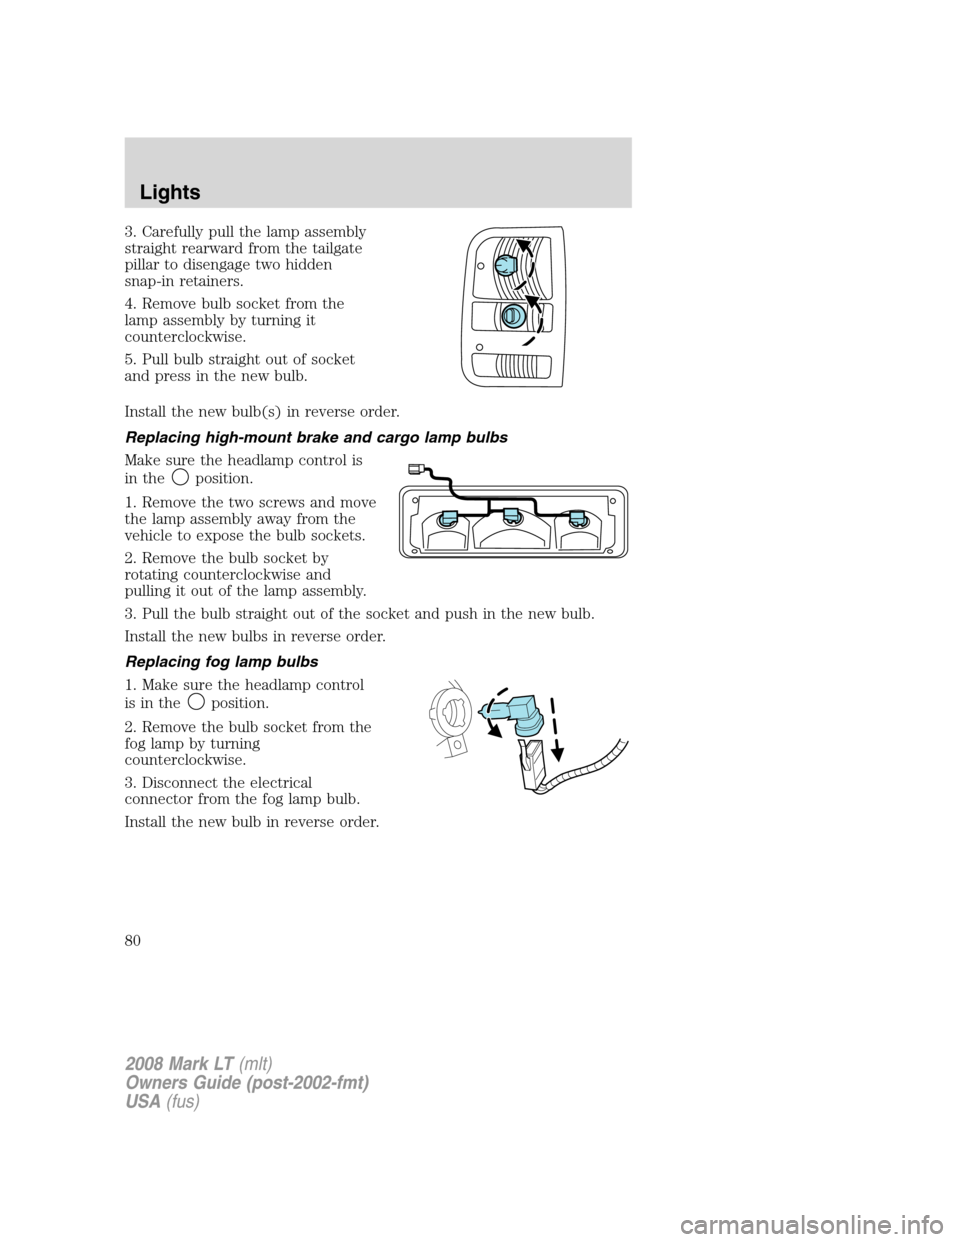 LINCOLN MARK LT 2008  Owners Manual 3. Carefully pull the lamp assembly
straight rearward from the tailgate
pillar to disengage two hidden
snap-in retainers.
4. Remove bulb socket from the
lamp assembly by turning it
counterclockwise.
5